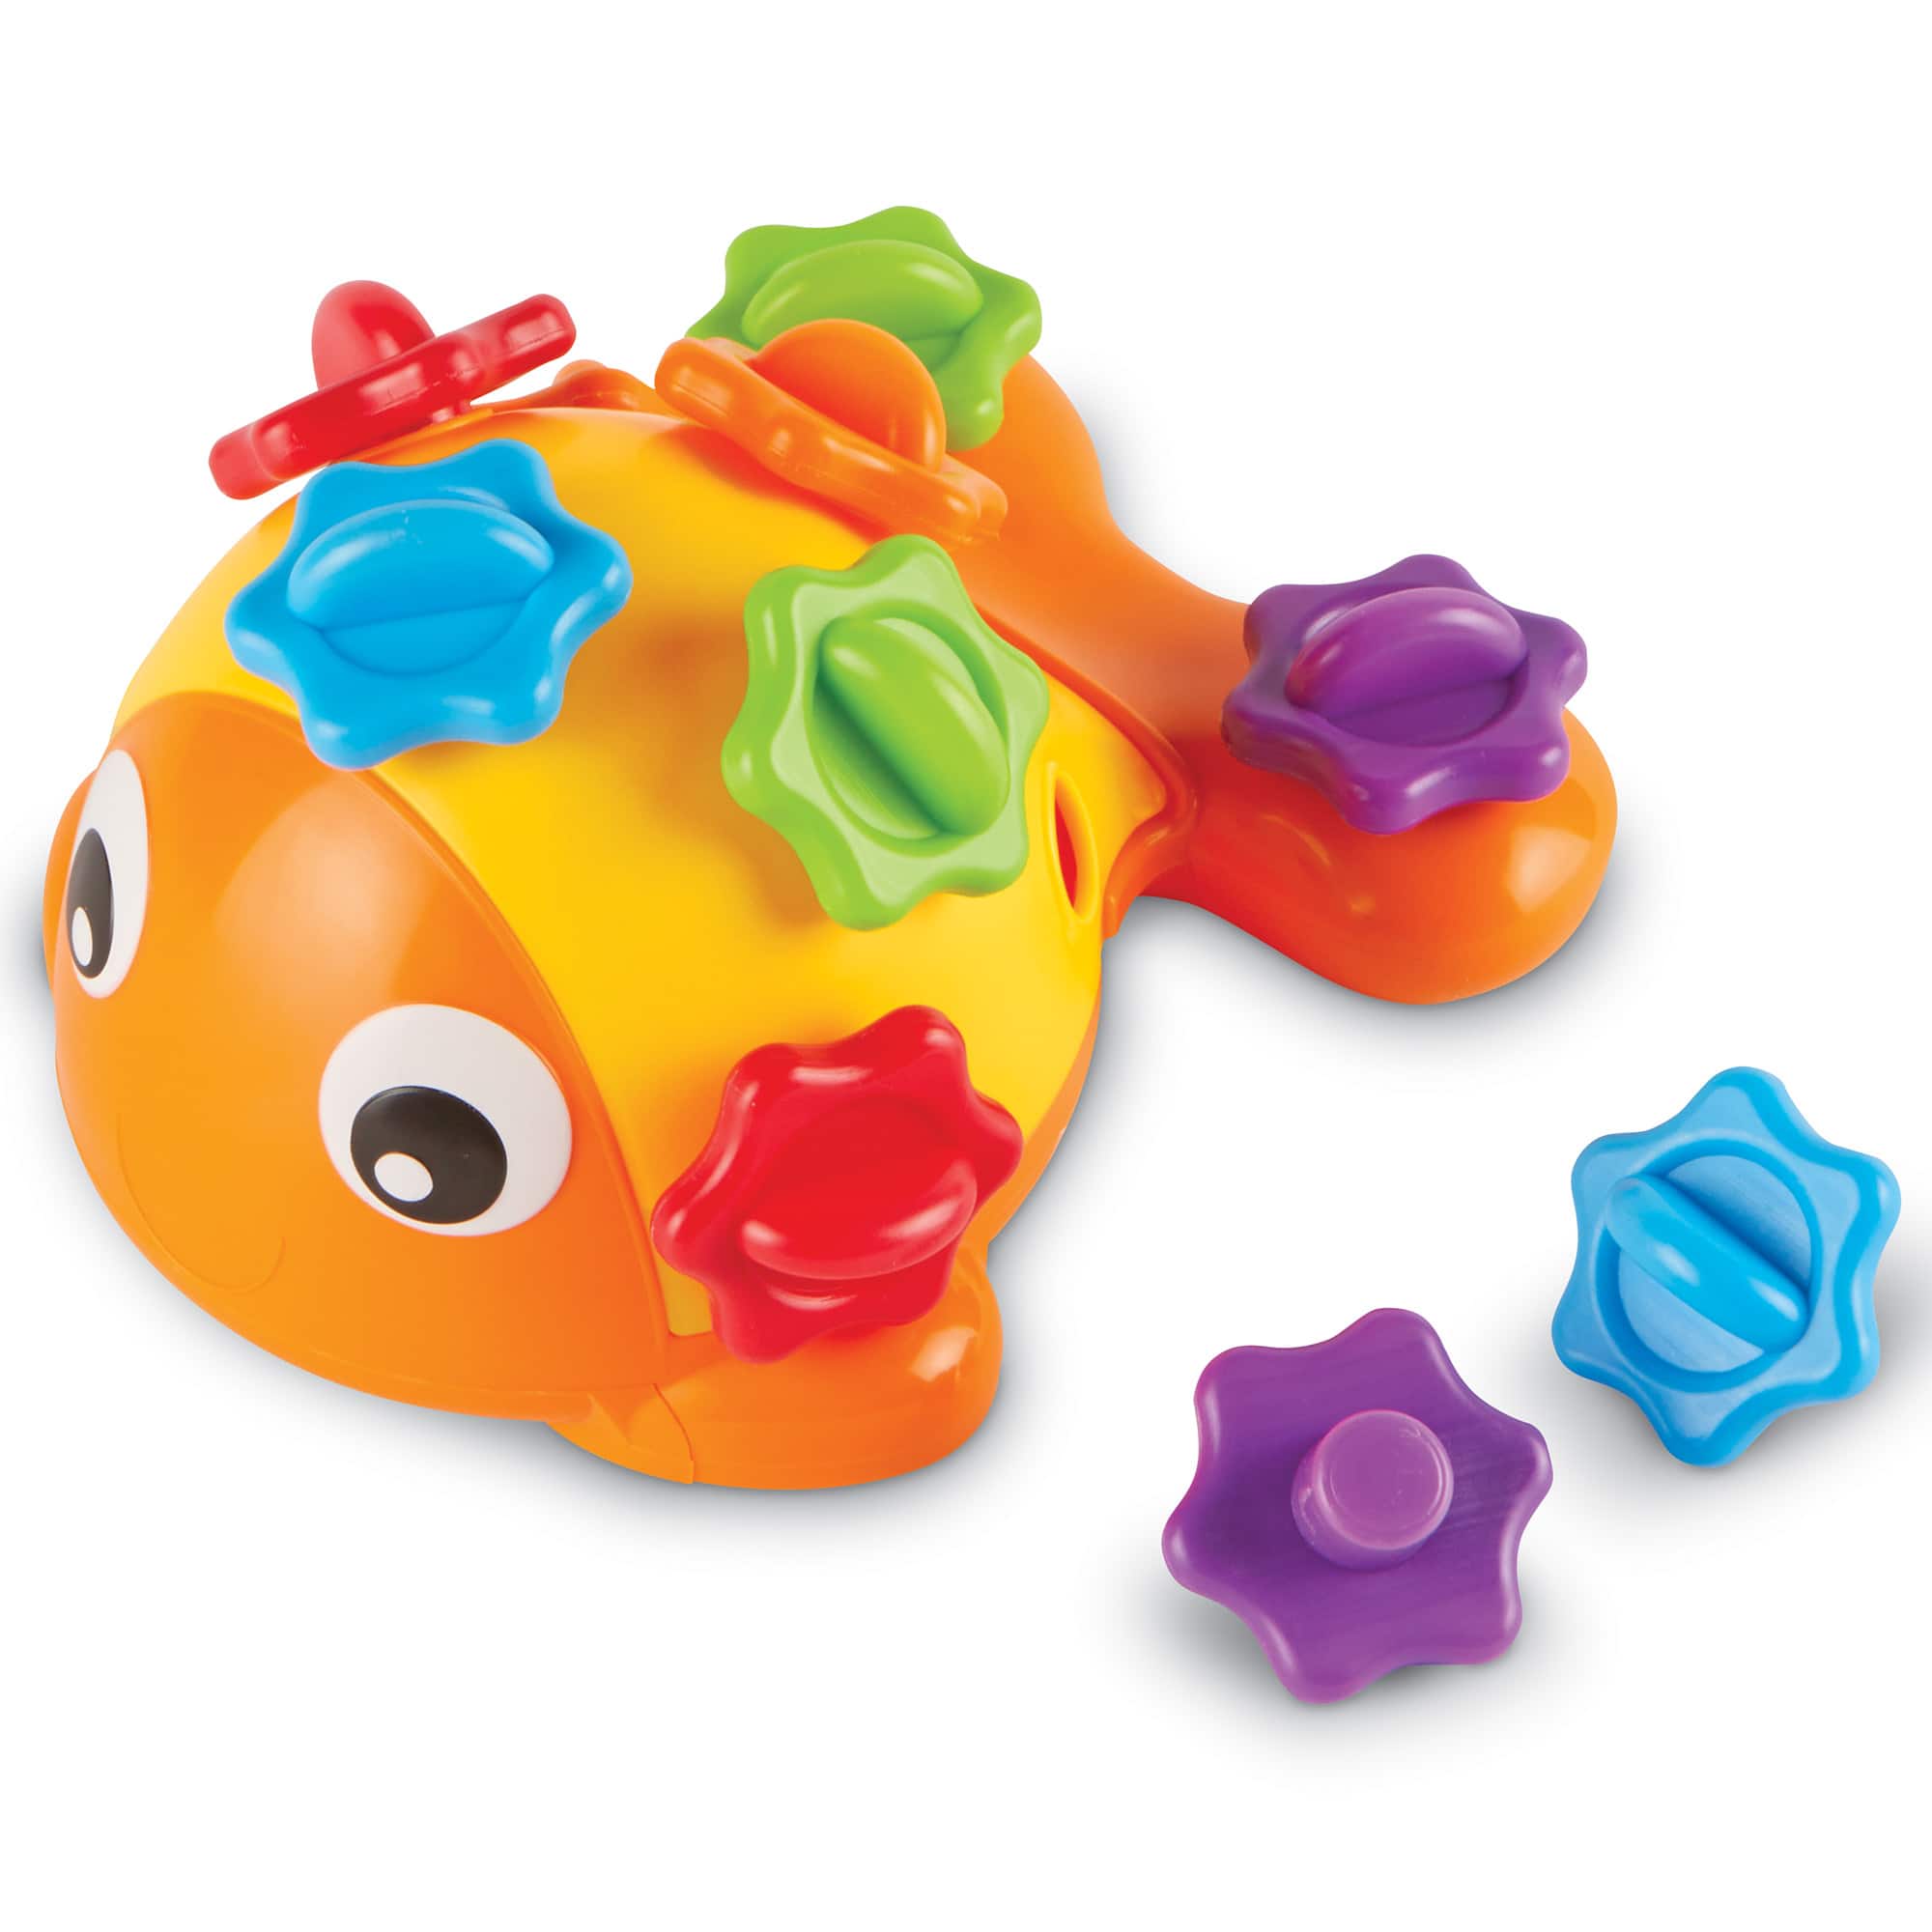 Learning Resources Finn the Fine Motor Fish